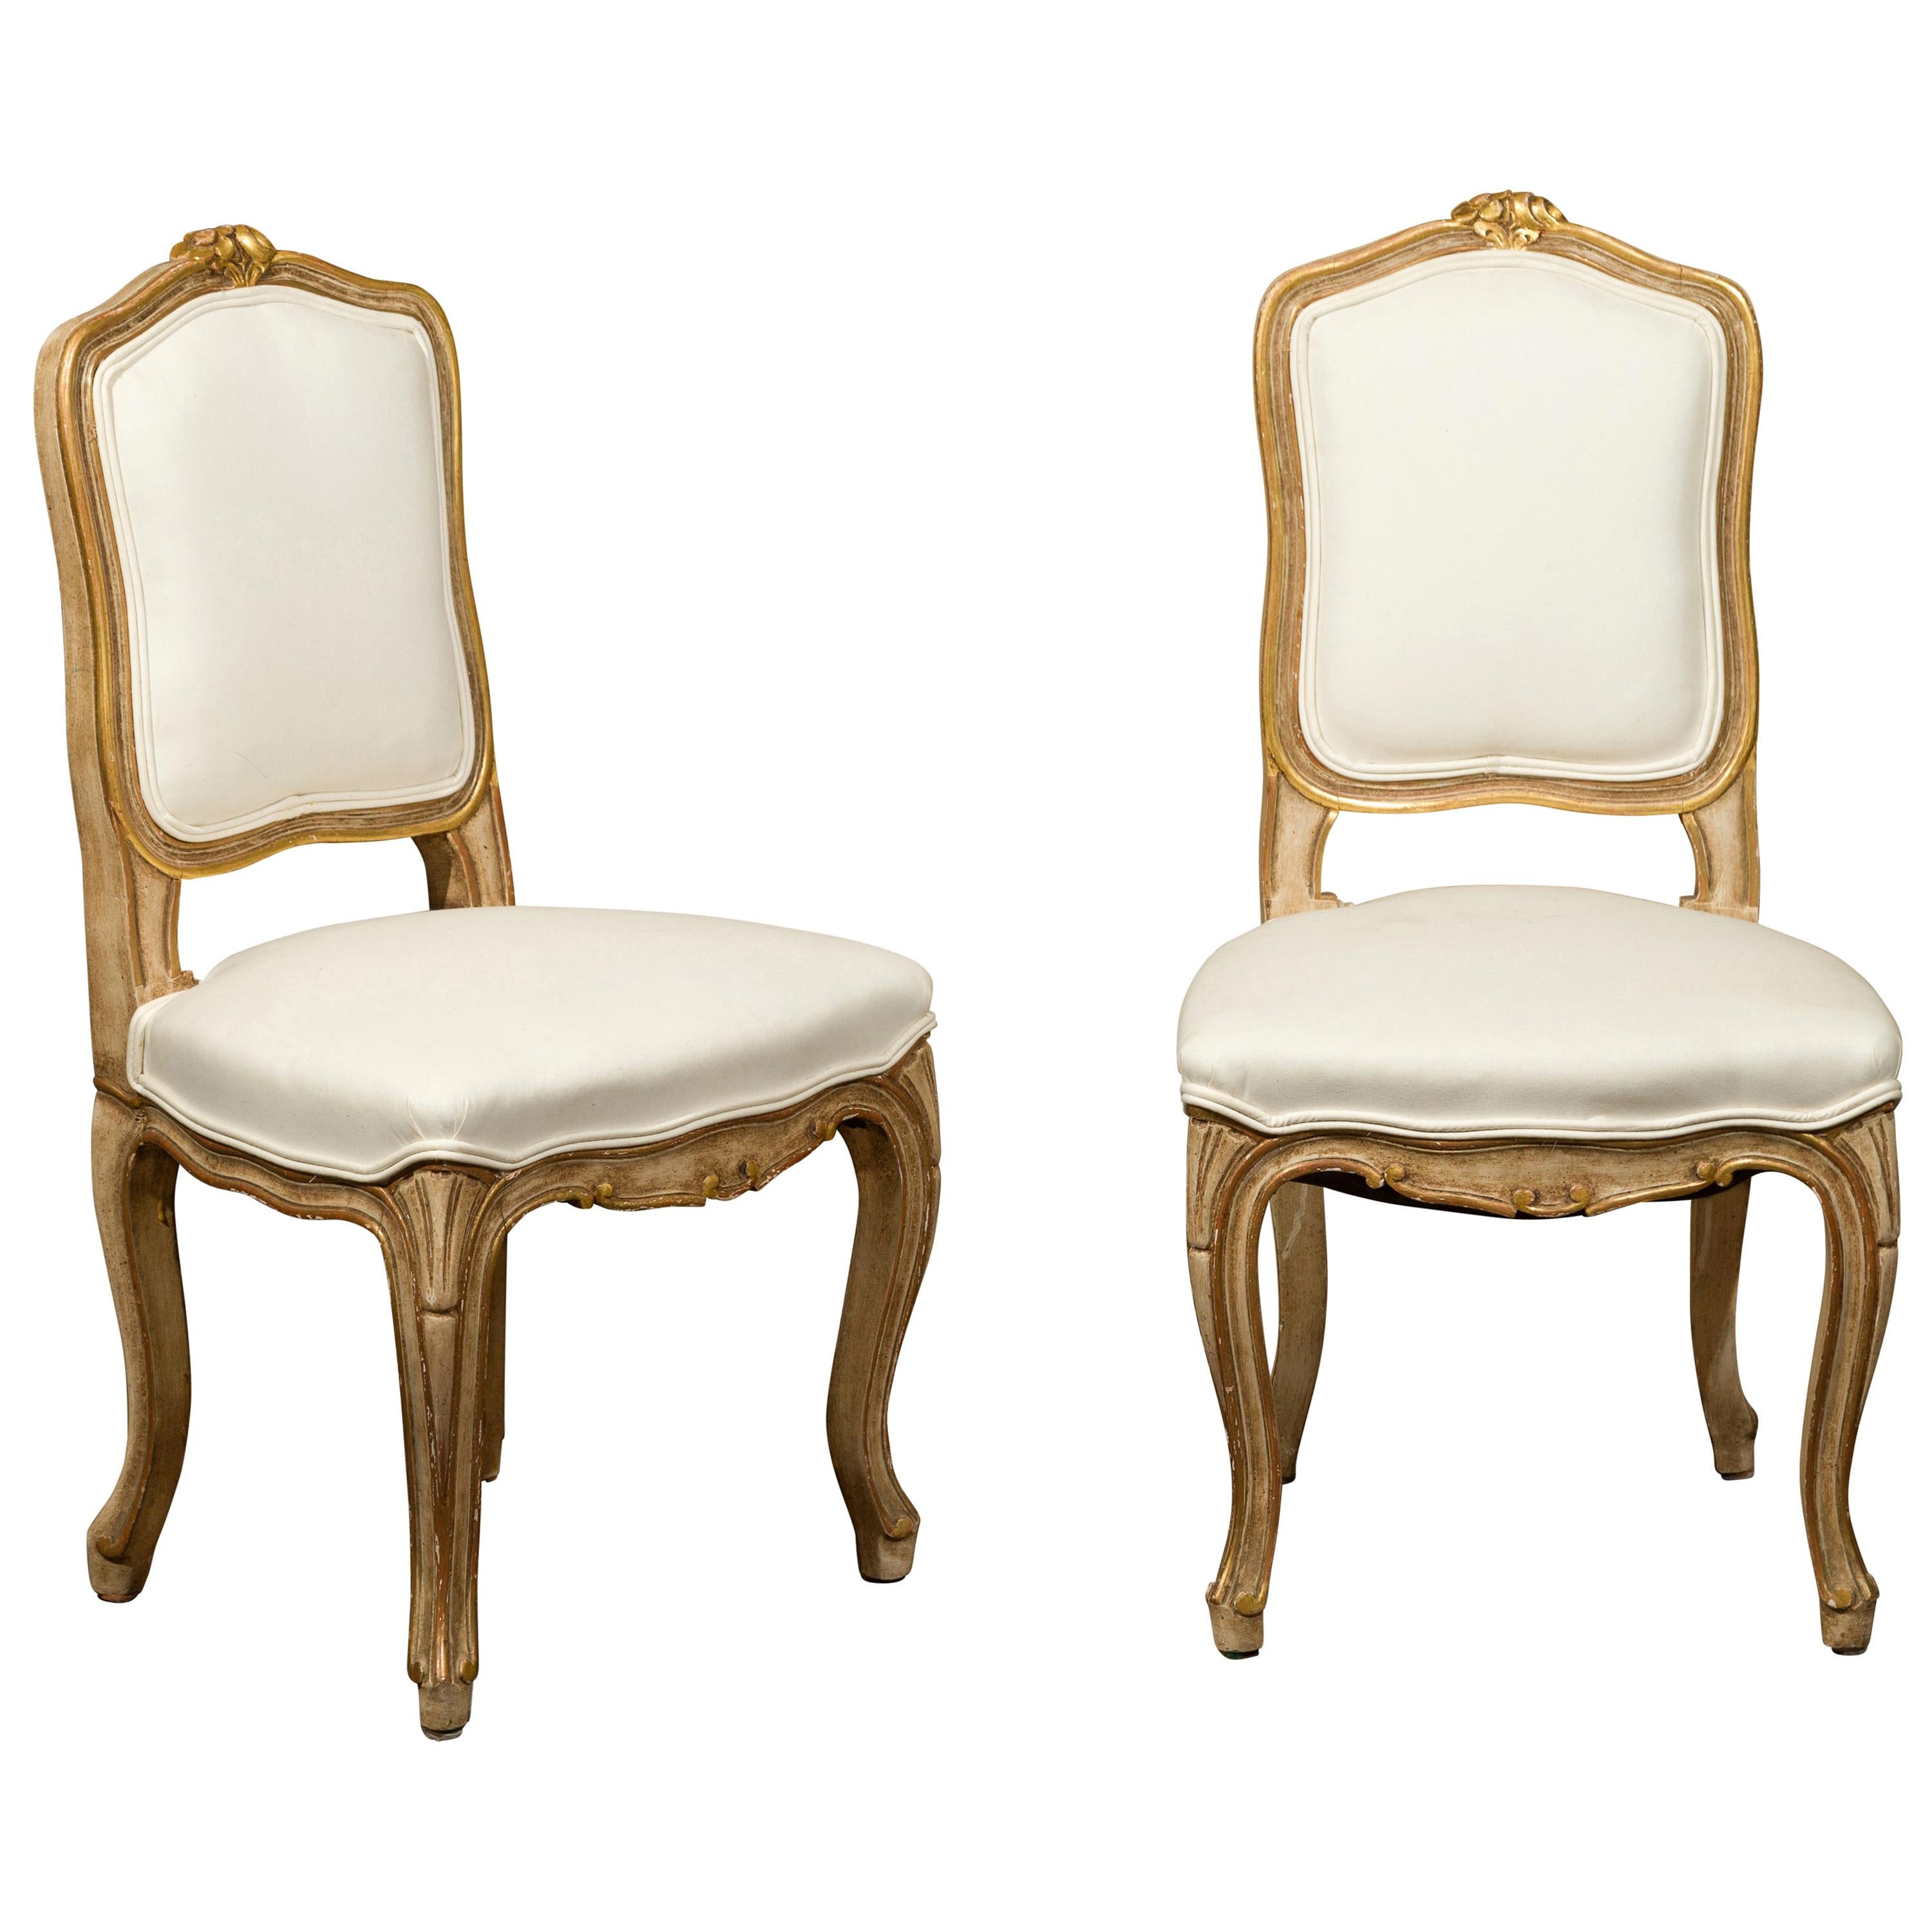 Pair of 1920s Louis XV Style Painted and Gilt Child's Chairs with Carved Flowers